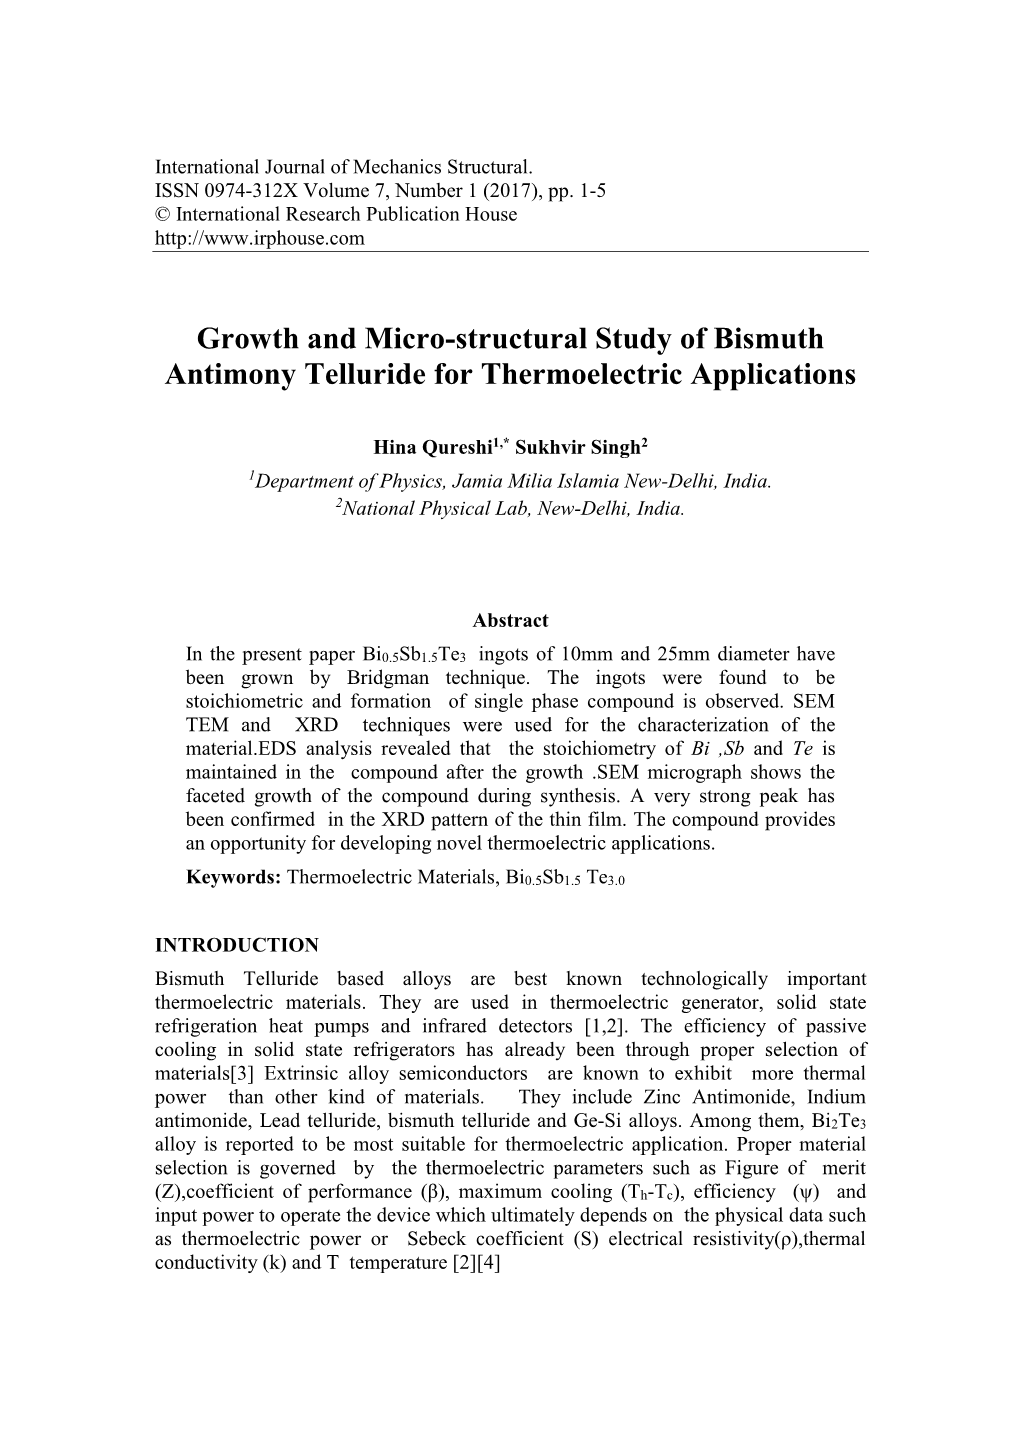 Growth and Micro-Structural Study of Bismuth Antimony Telluride for Thermoelectric Applications